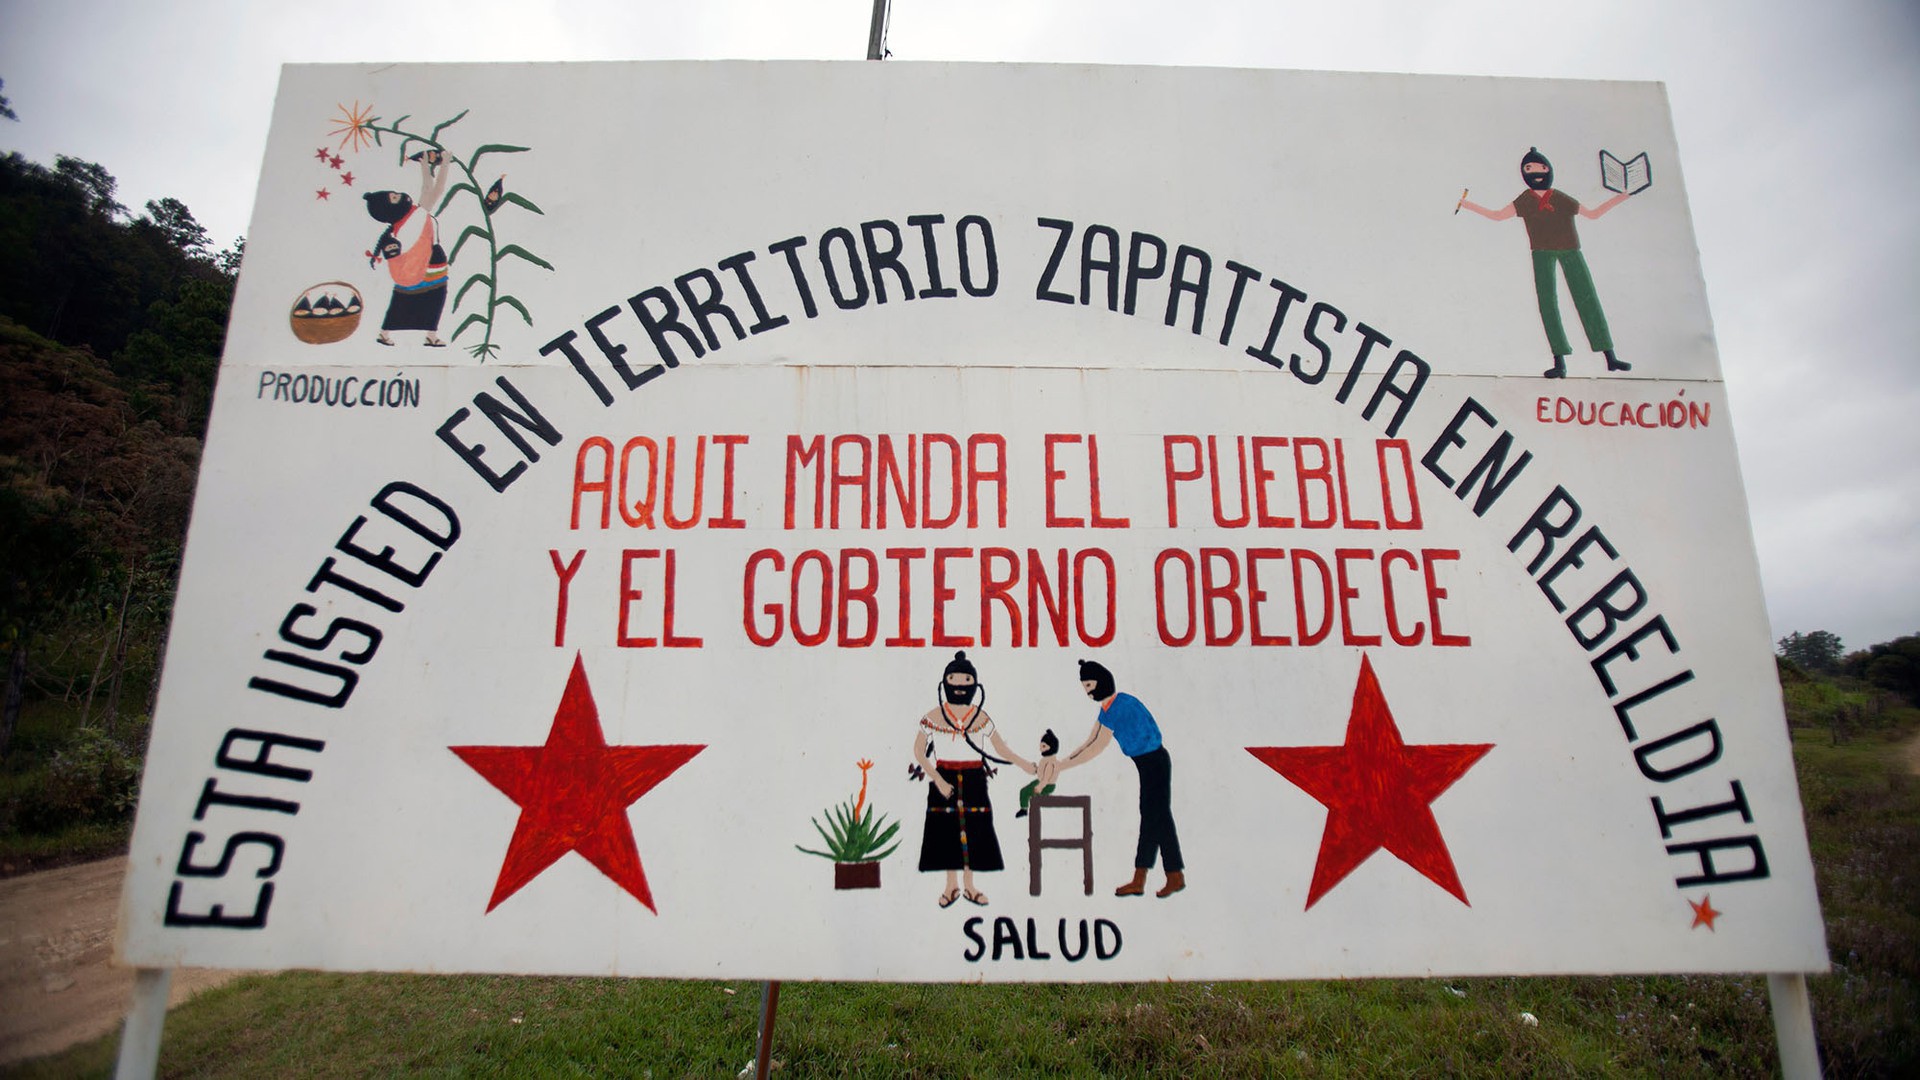 The sign at the gate to Caracol Morelia depicts the Zapatista lifestyle - production and agriculture, health and education. Visitors to the caracoles, the independent Zapatista communities, need to be approved by the Council of Good Governance before entry. (Photo by Connor Radnovich.)